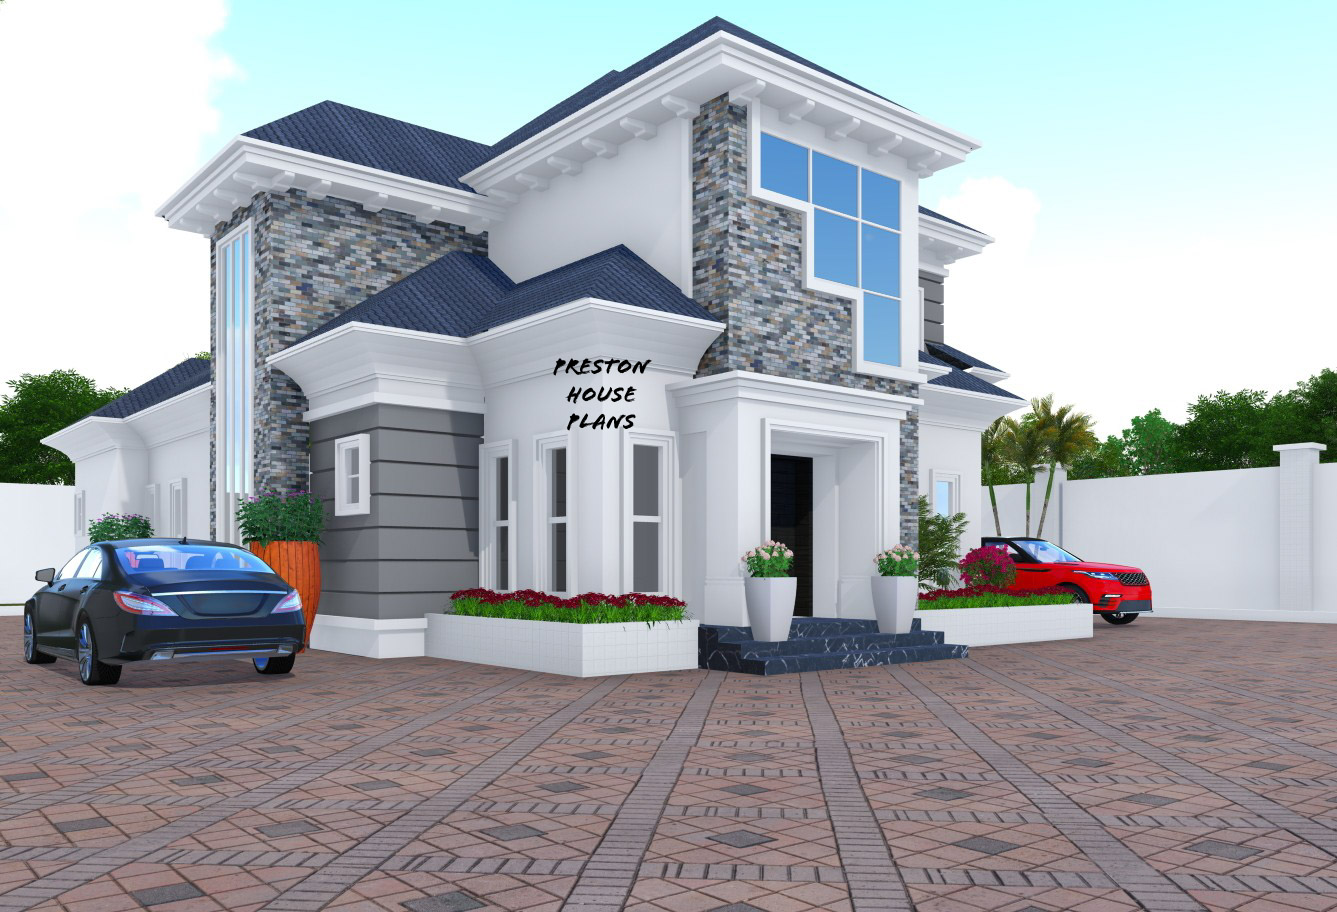 4 Bedroom Bungalow with a penthouse